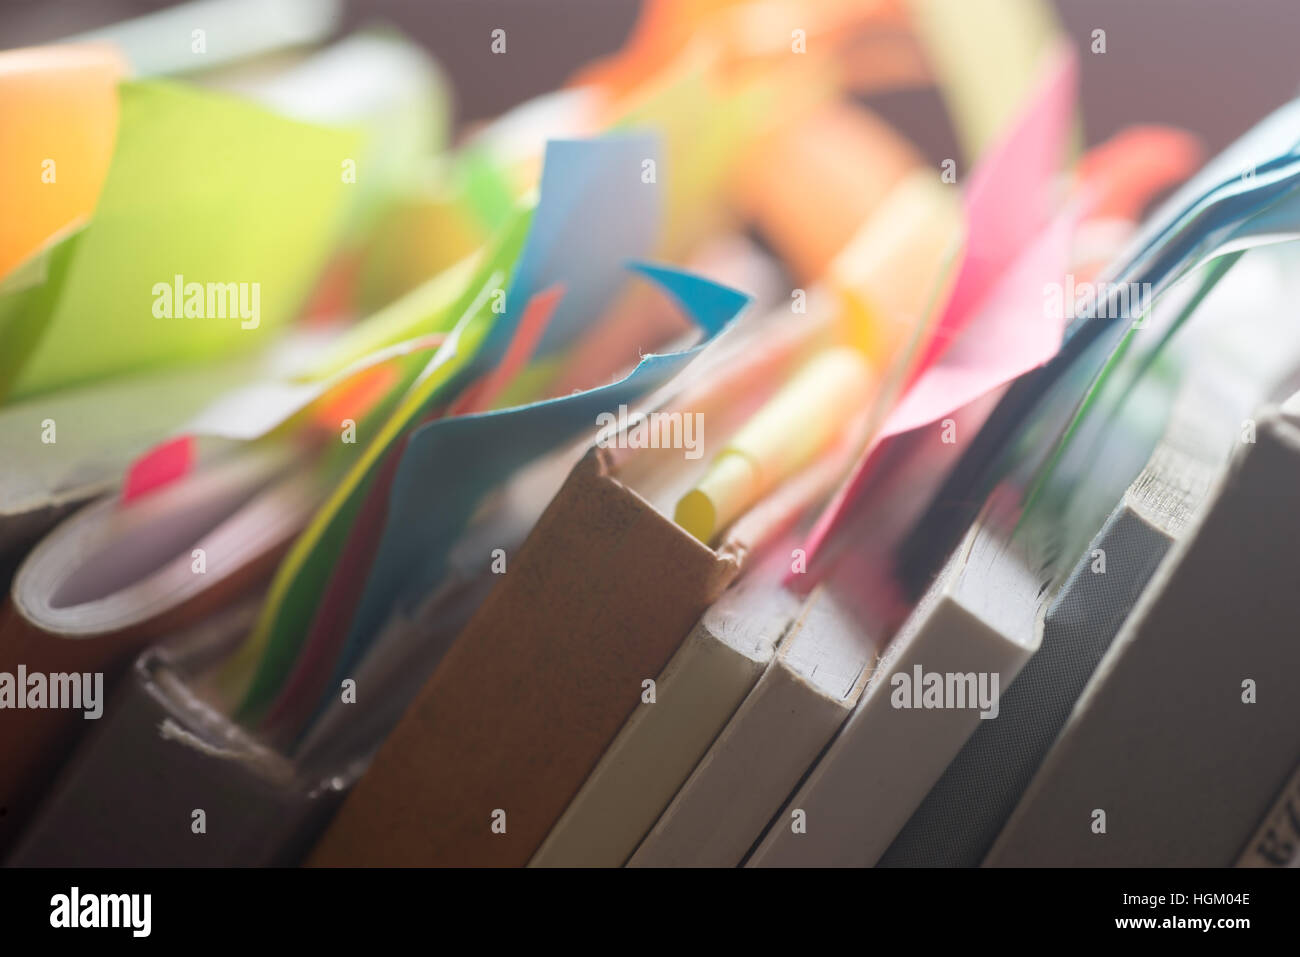 group of books and notebooks with multicolored stickers Stock Photo